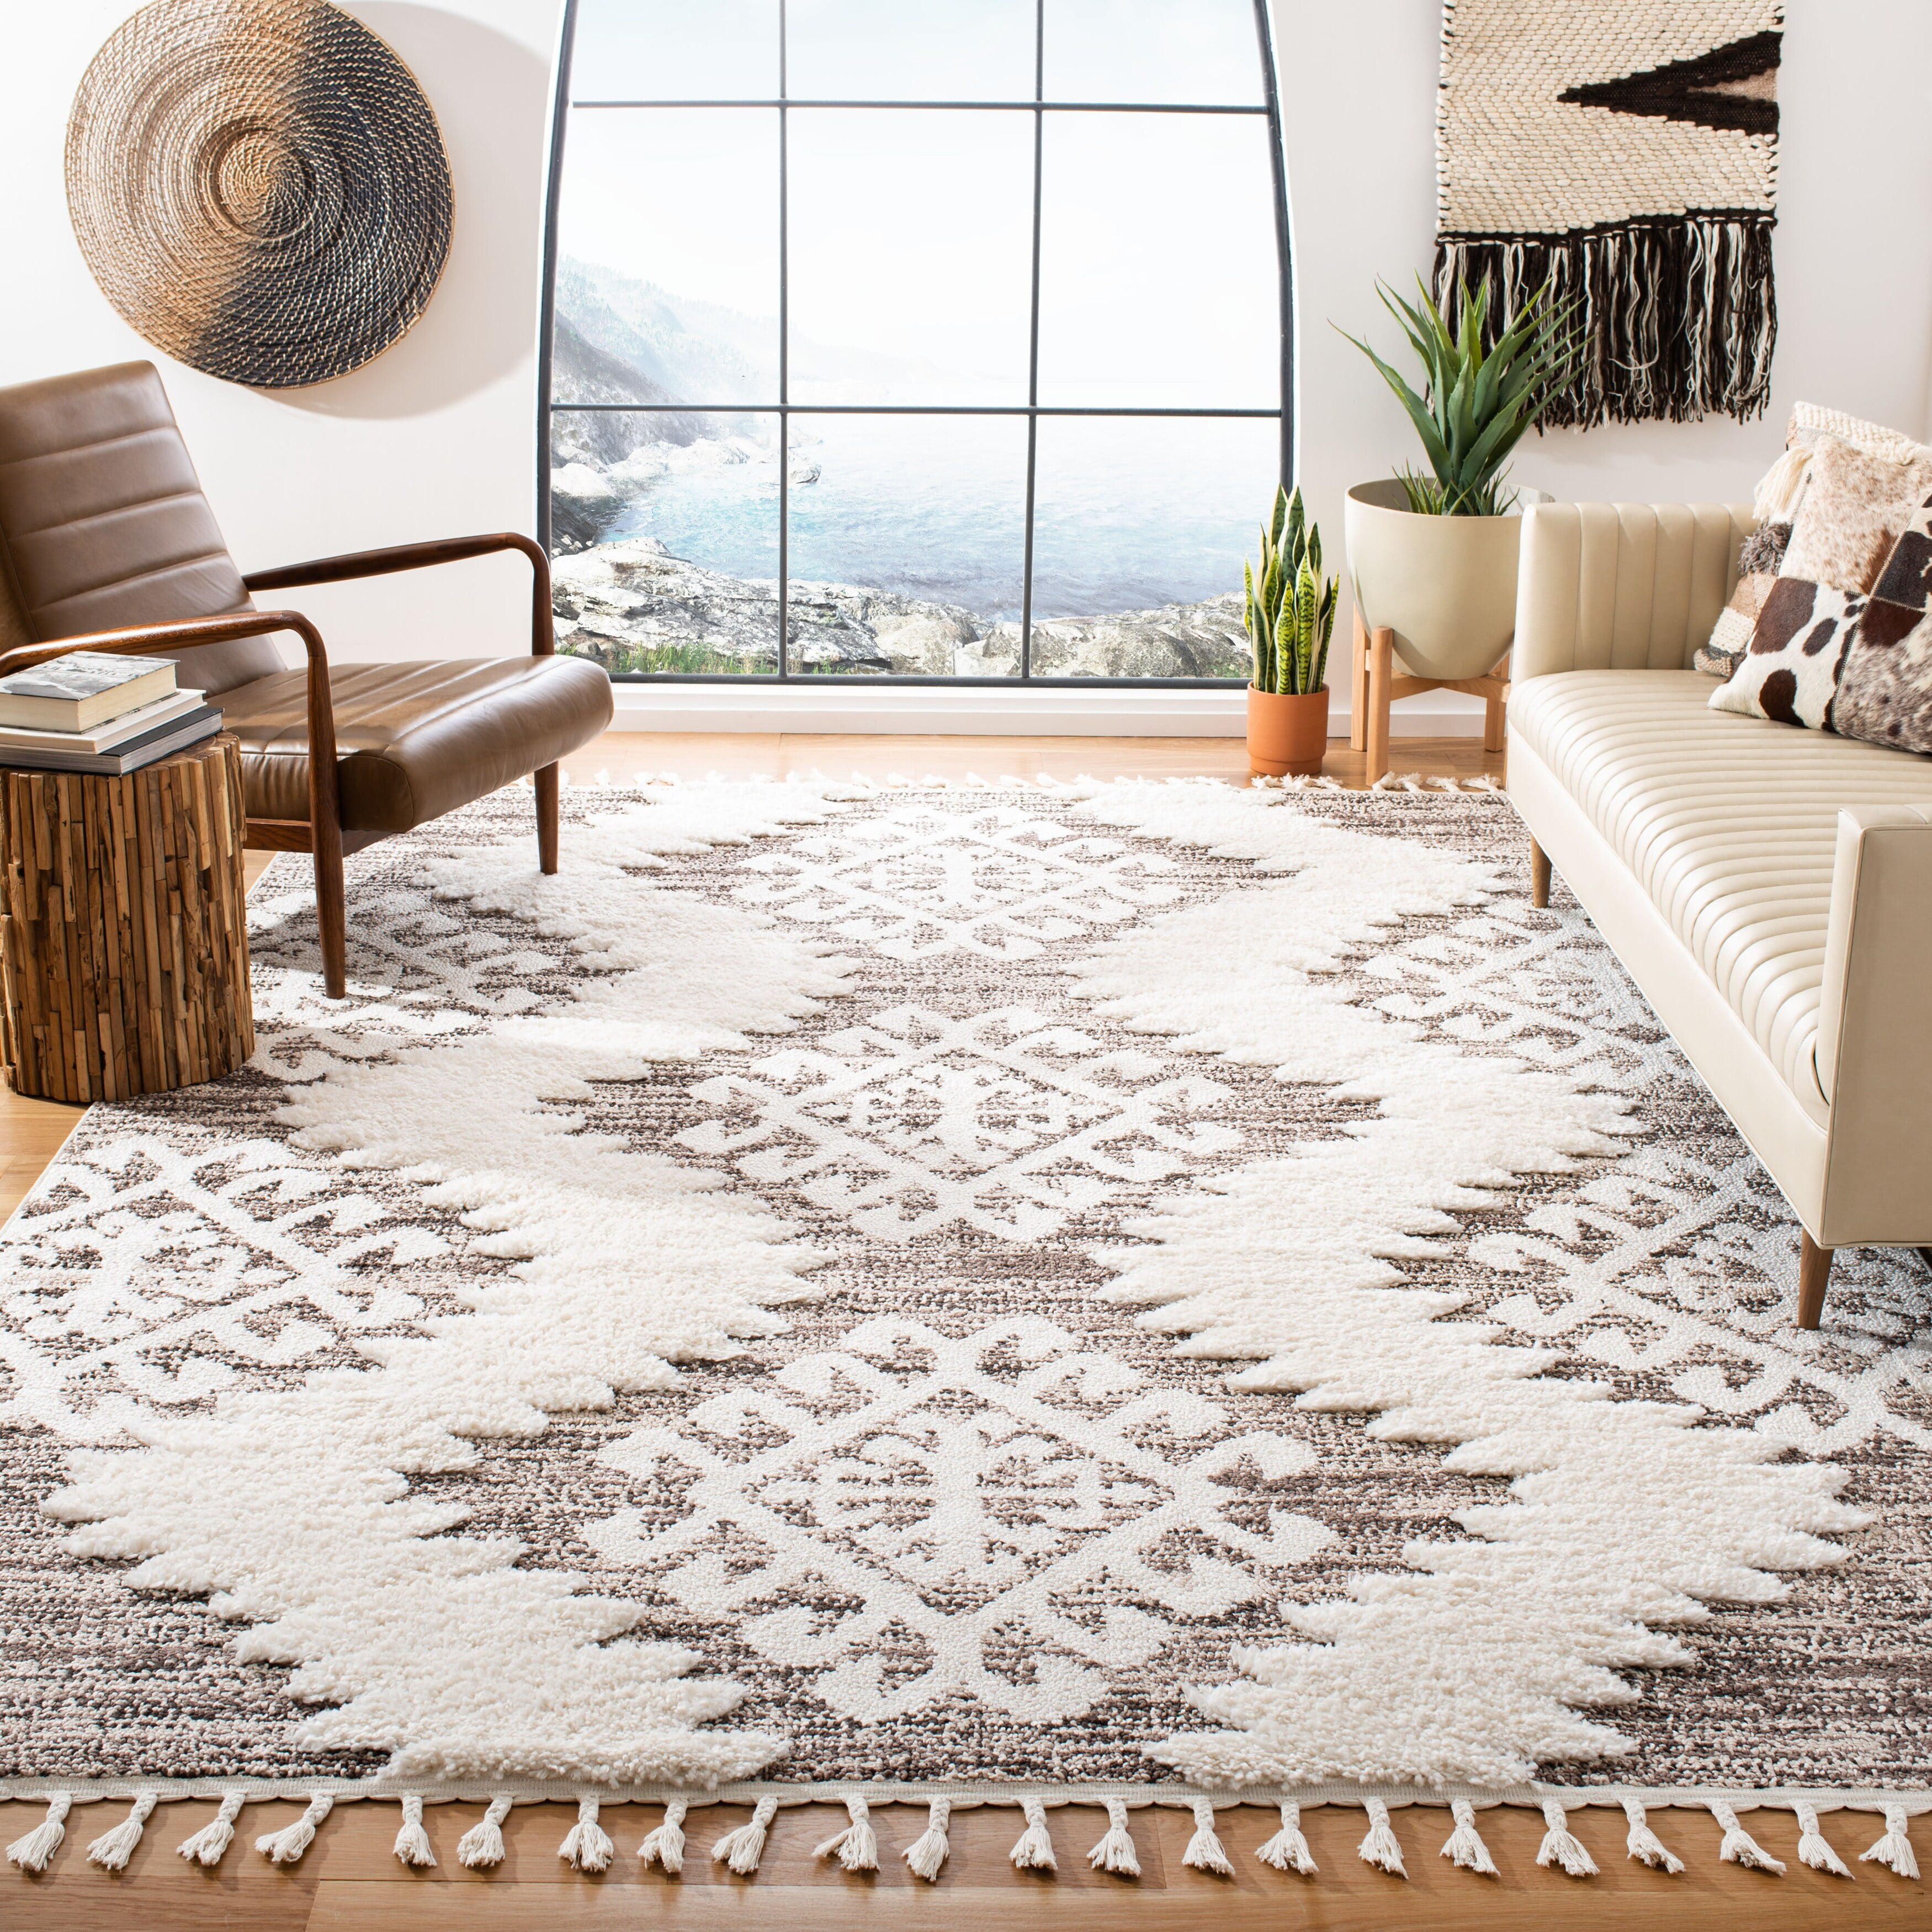 4' x 6' Safavieh MTS688A-4 Moroccan Tassel Shag Collection MTS688A Ivory and Brown Area Rug, 